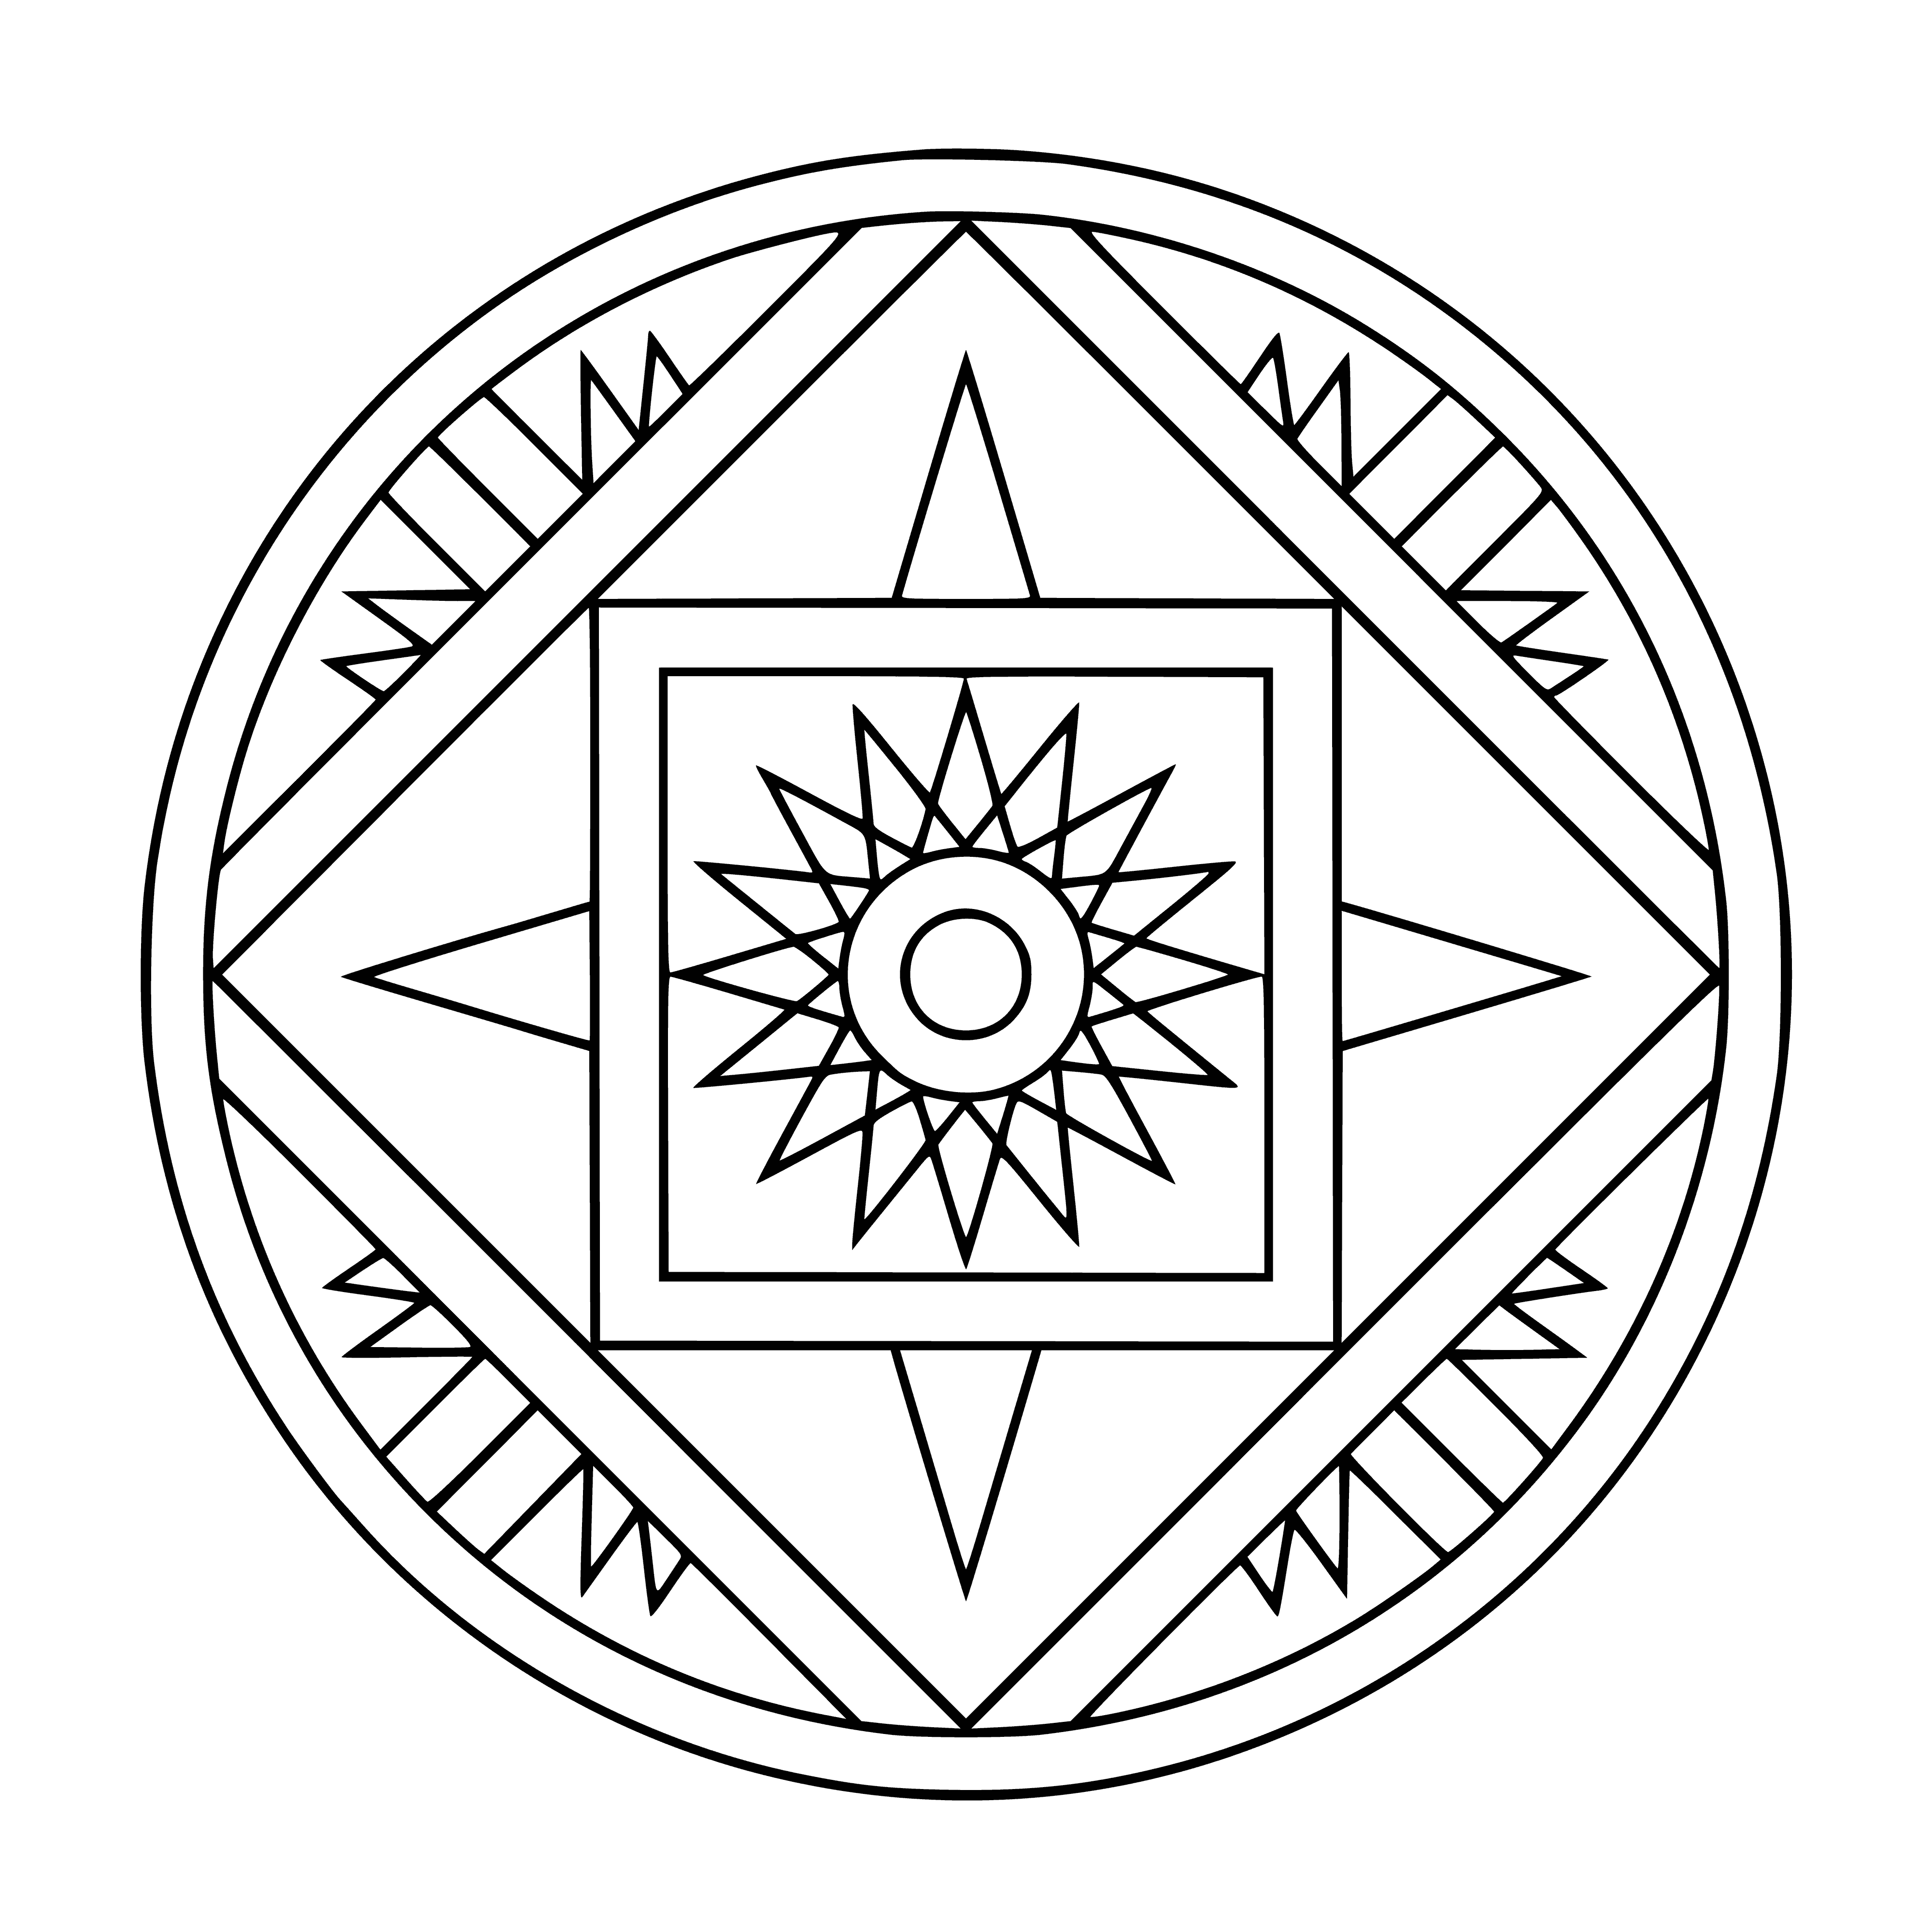 coloring page: Circle w/ smaller circle divides 4 quadrants each w/ diff. design: lotus flower, spiral, star, sun. Bordered by outer circle.